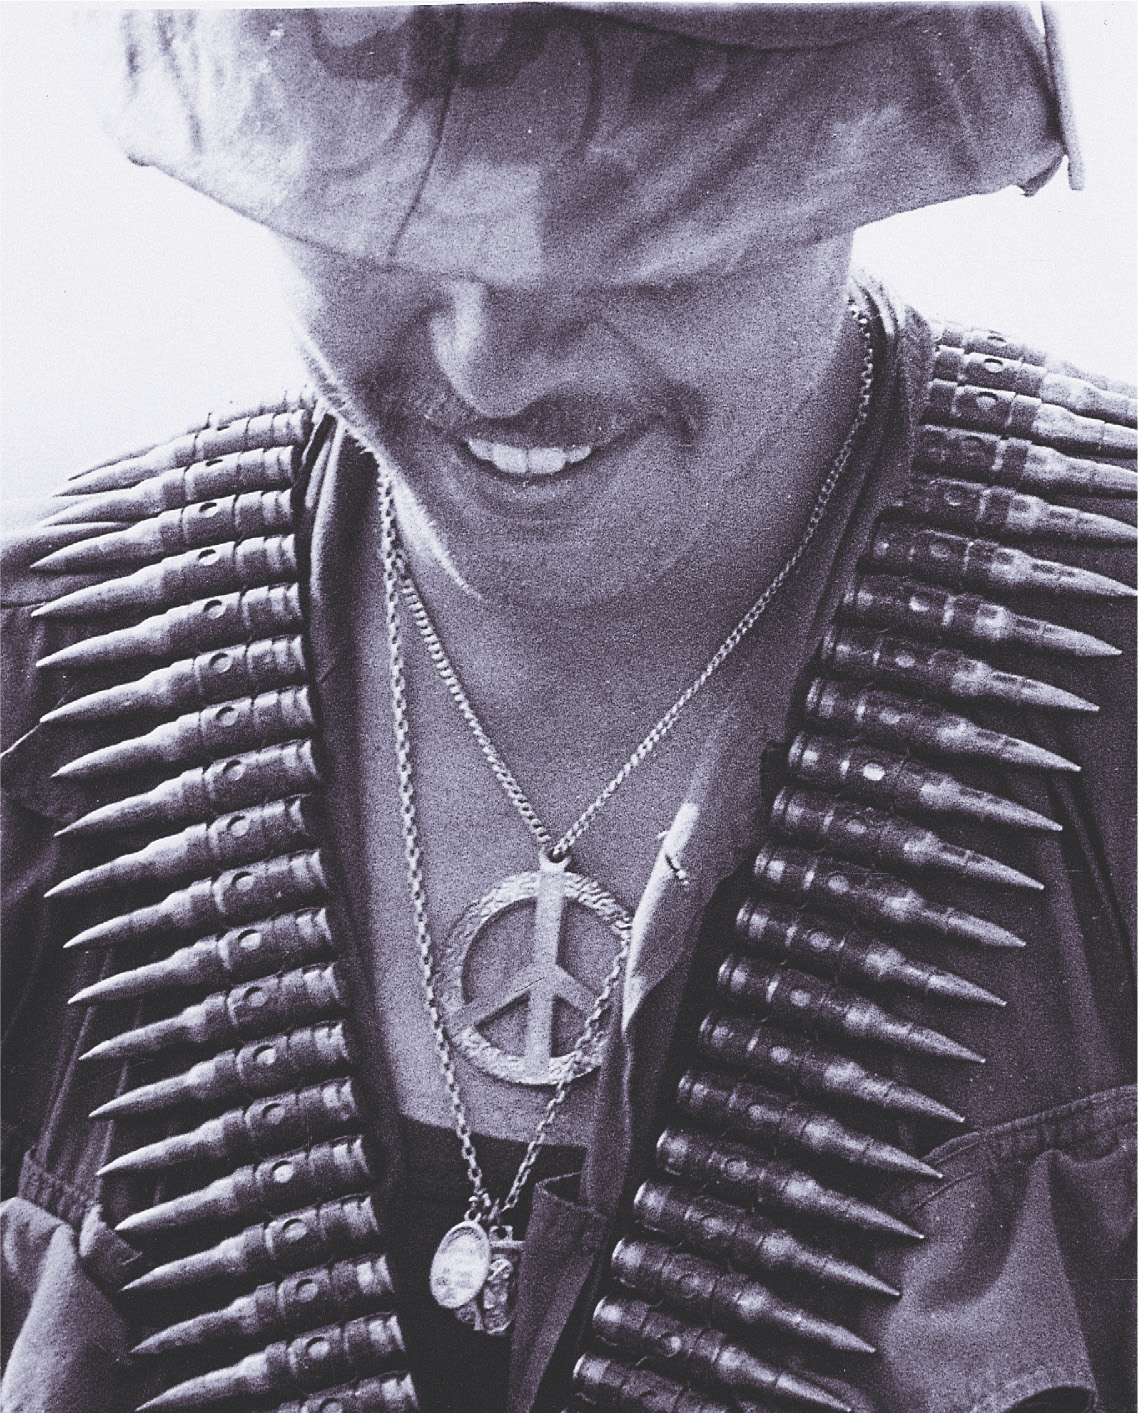 photo: a soldier wears bandoliers of bullets and a peace-sign necklace.